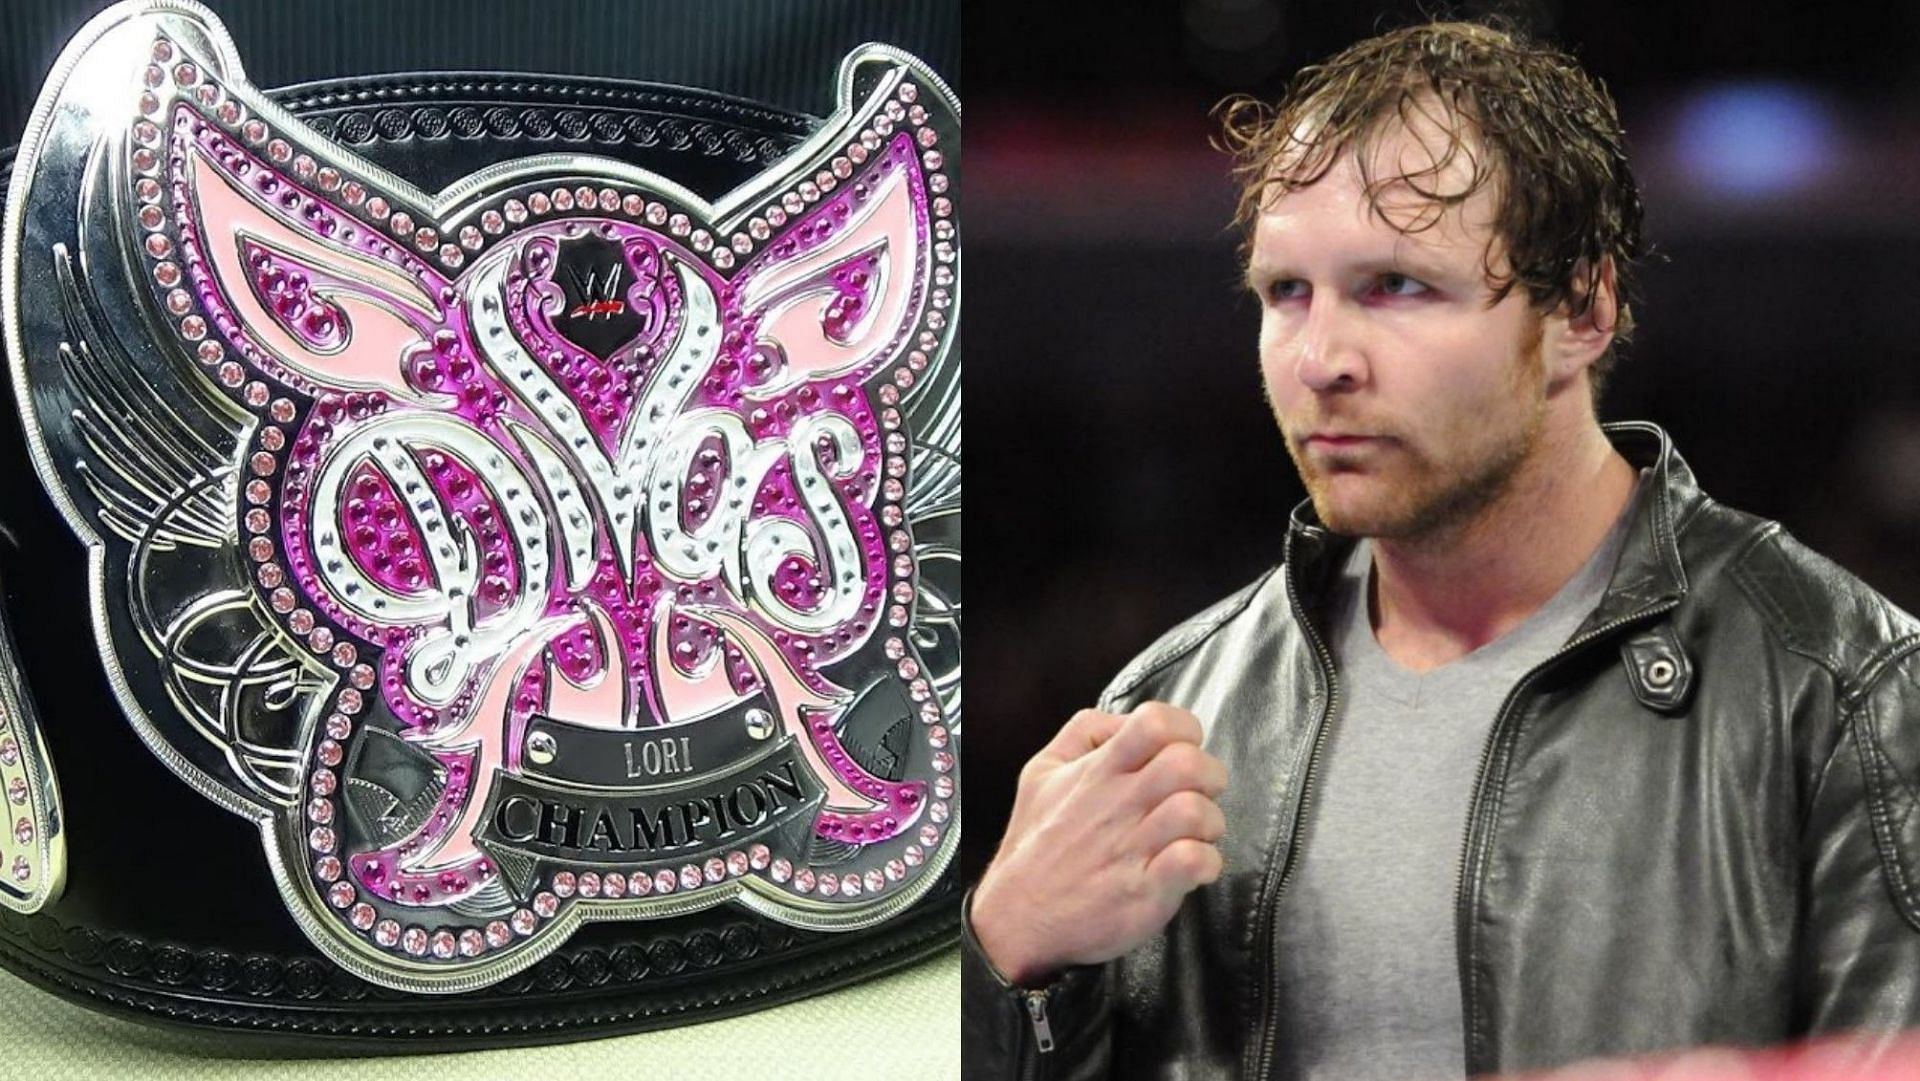 The Lunatic Fringe was one of the most entertaining acts during his time in WWE